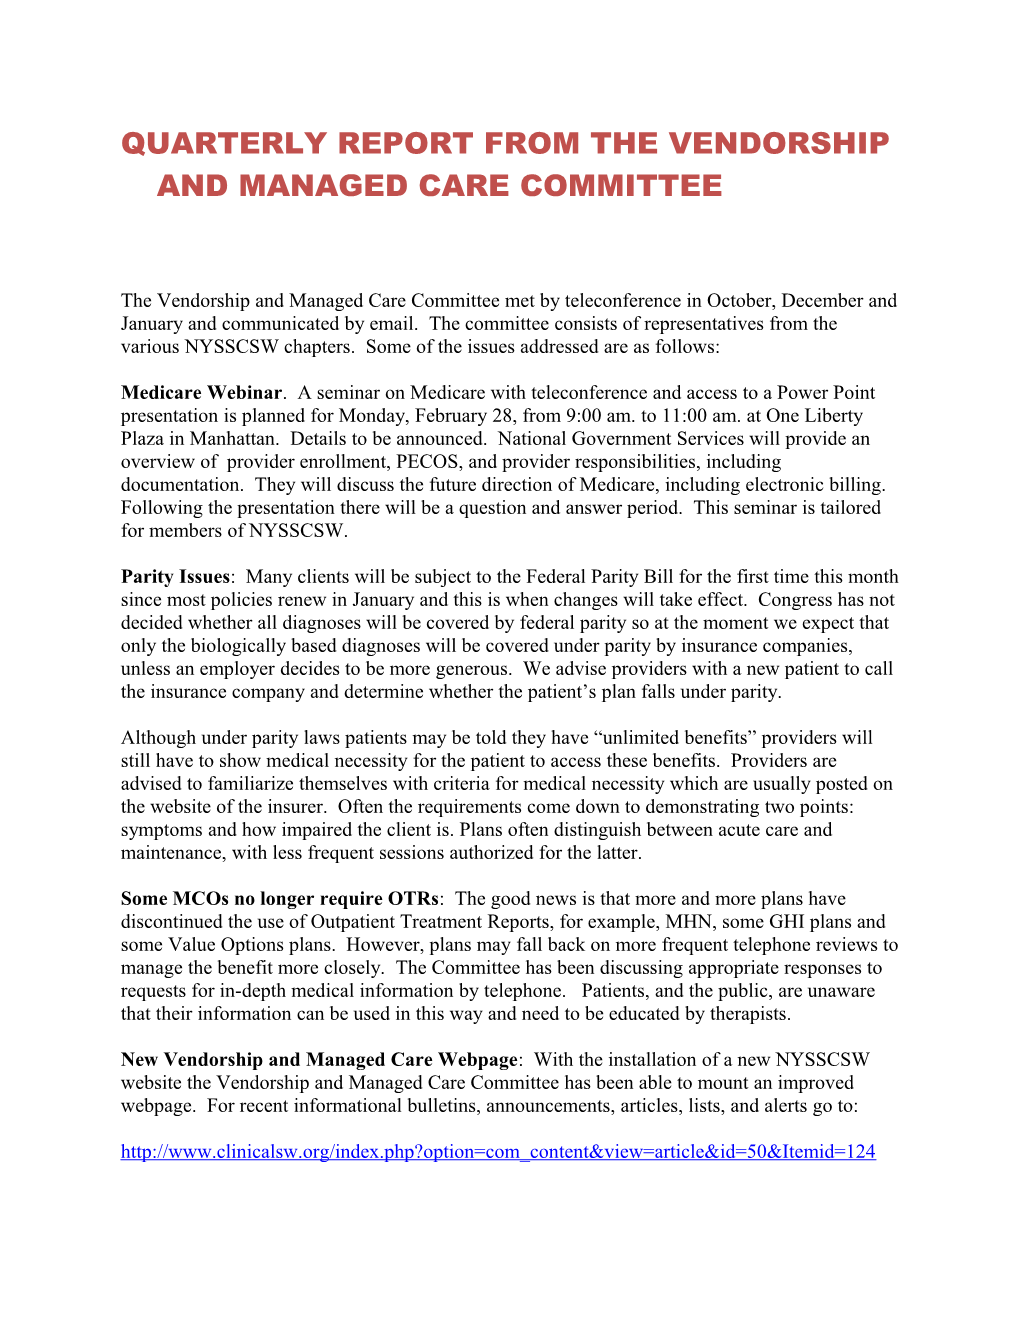 Quarterly Report from the Vendorship and Managed Care Committee